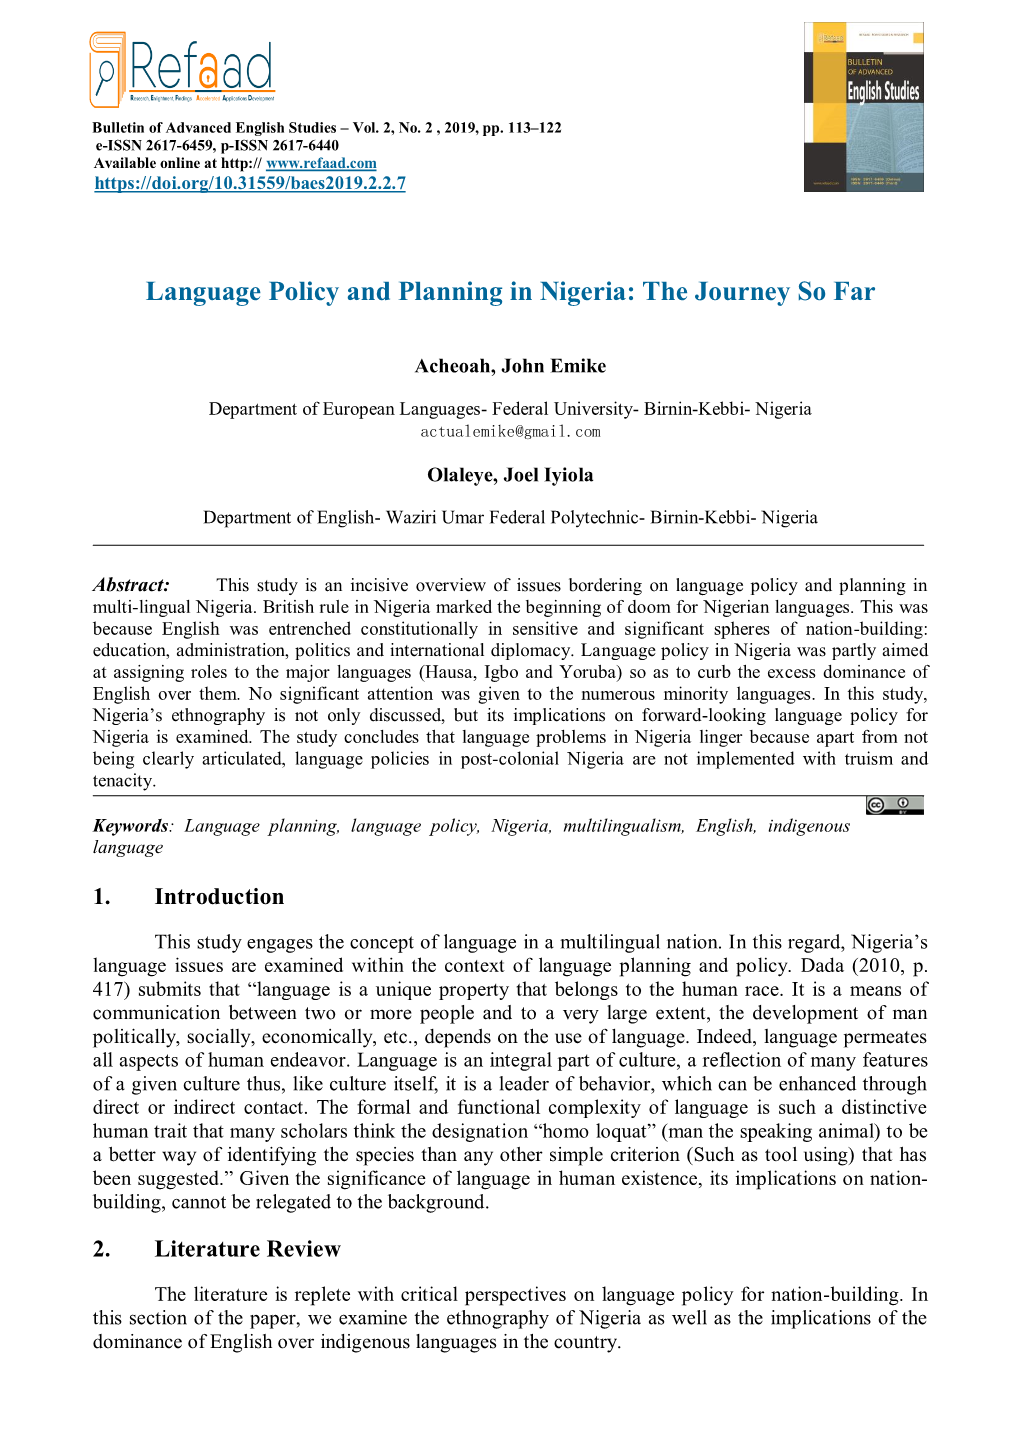 Language Policy and Planning in Nigeria: the Journey So Far